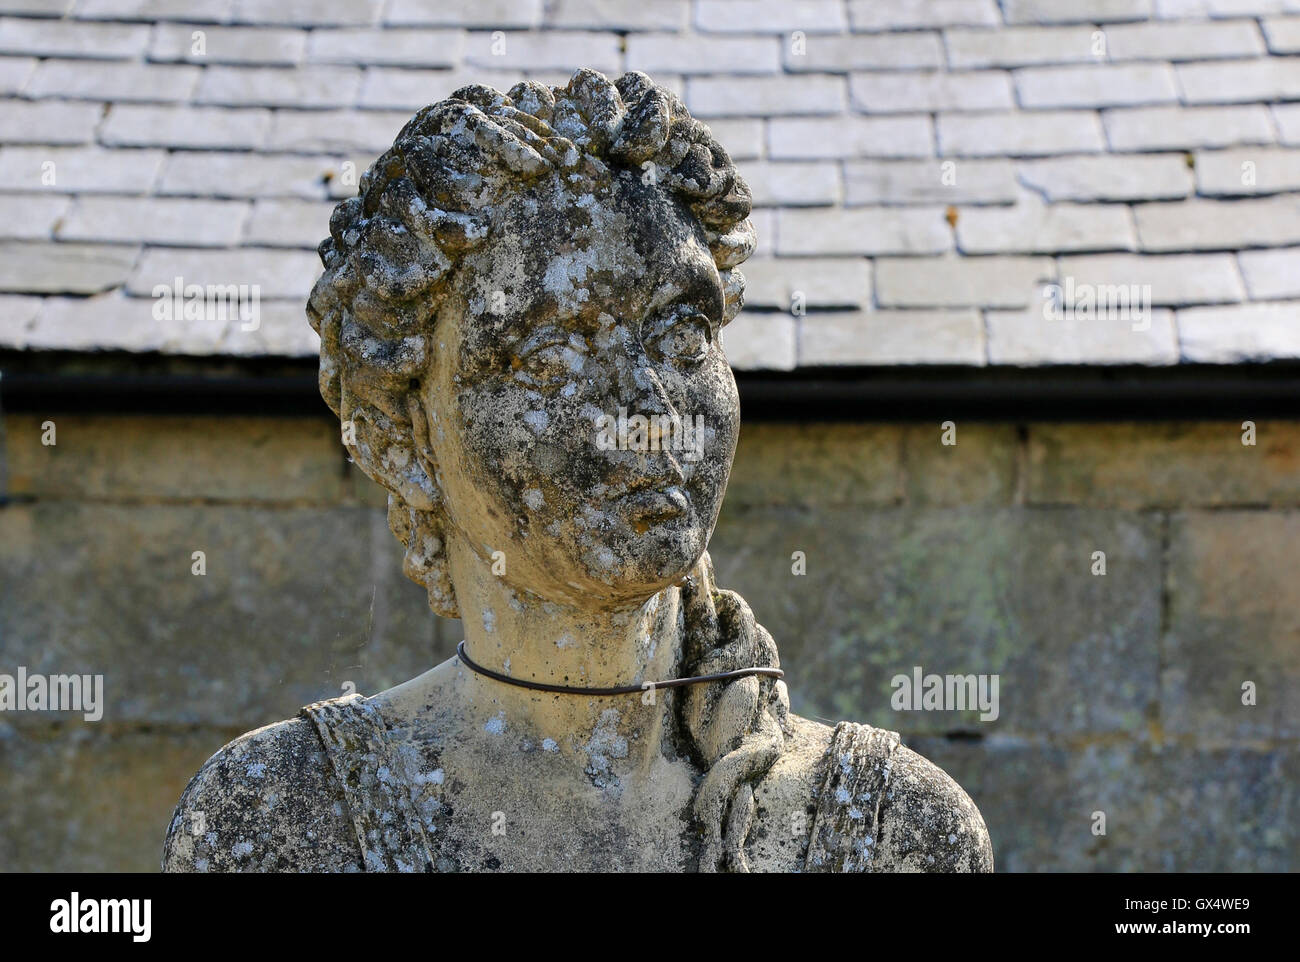 weathered stone statue of a female head and shoulders, a garden ornament Stock Photo